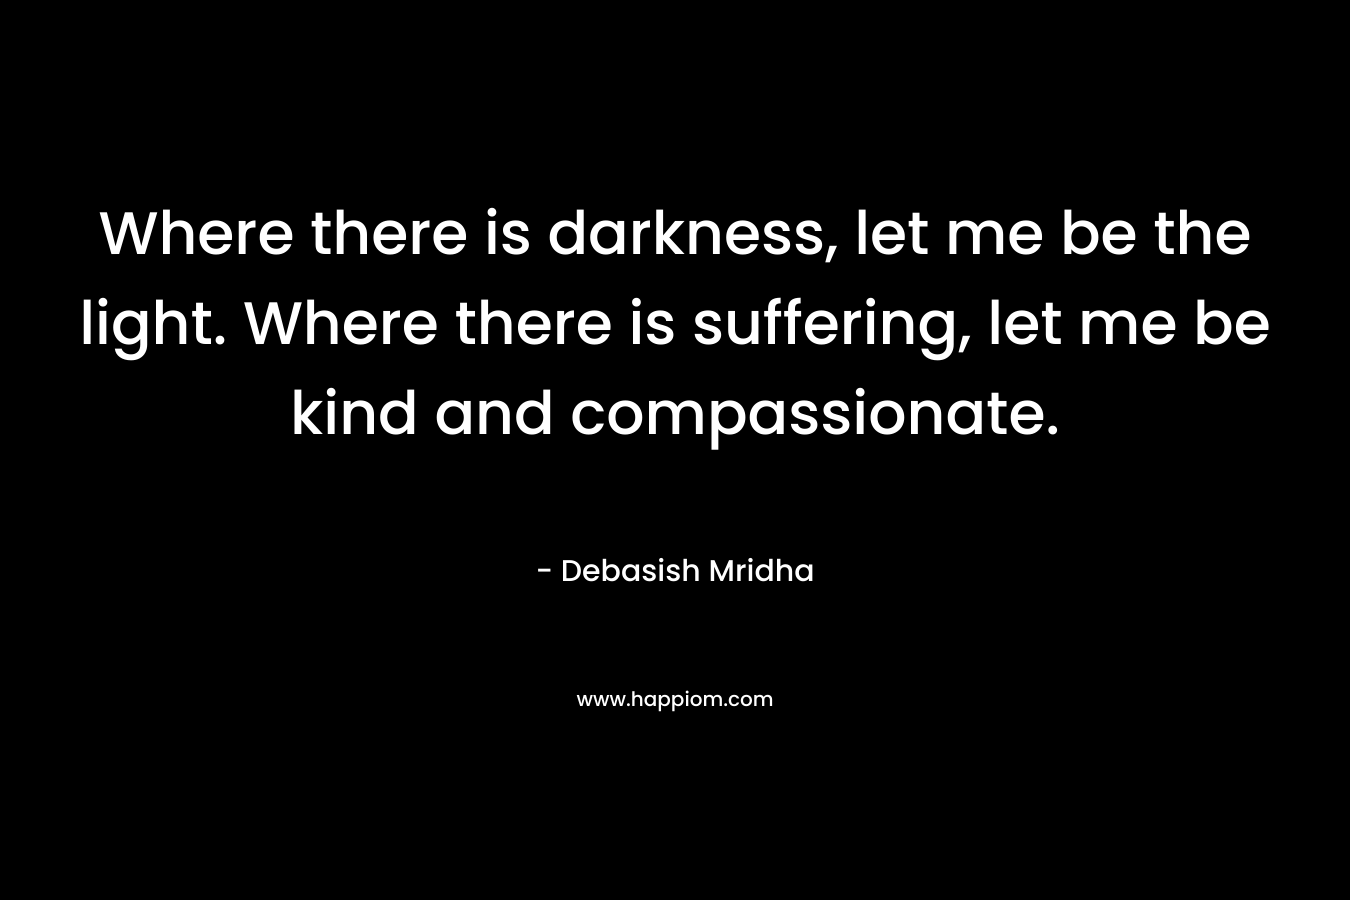 Where there is darkness, let me be the light. Where there is suffering, let me be kind and compassionate.